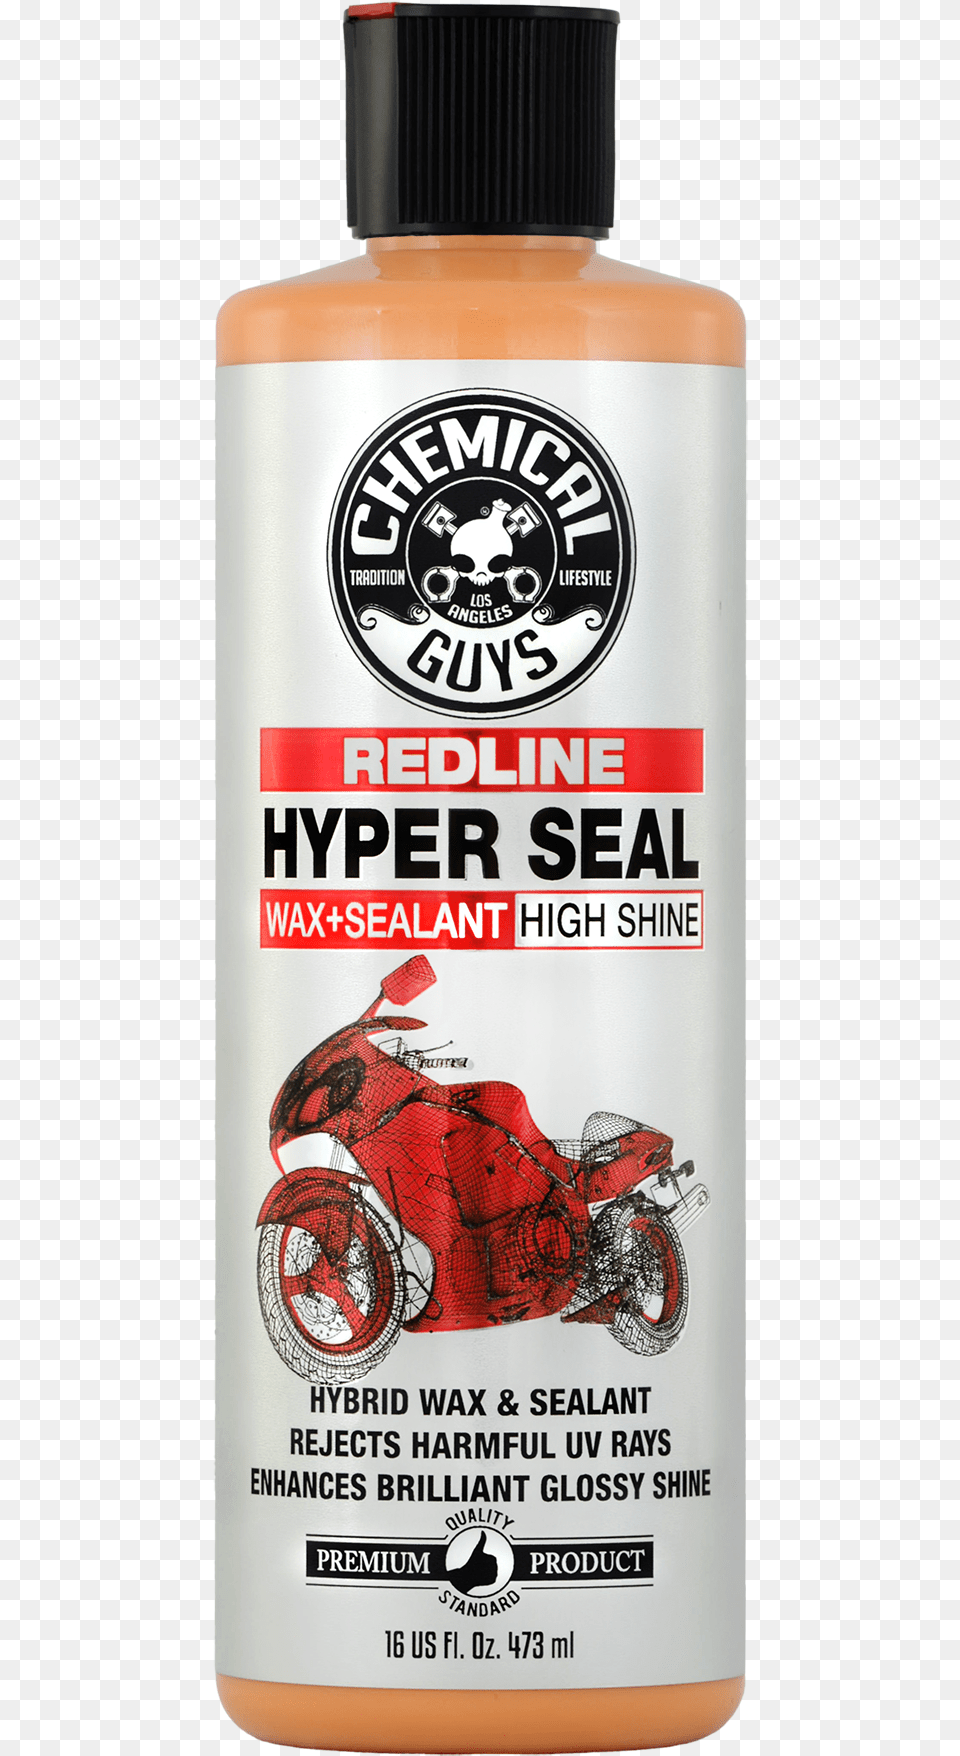 Wax Seal Chemical Guys Moto Line Redline Hyper Seal High Shine, Bottle, Can, Tin Png Image